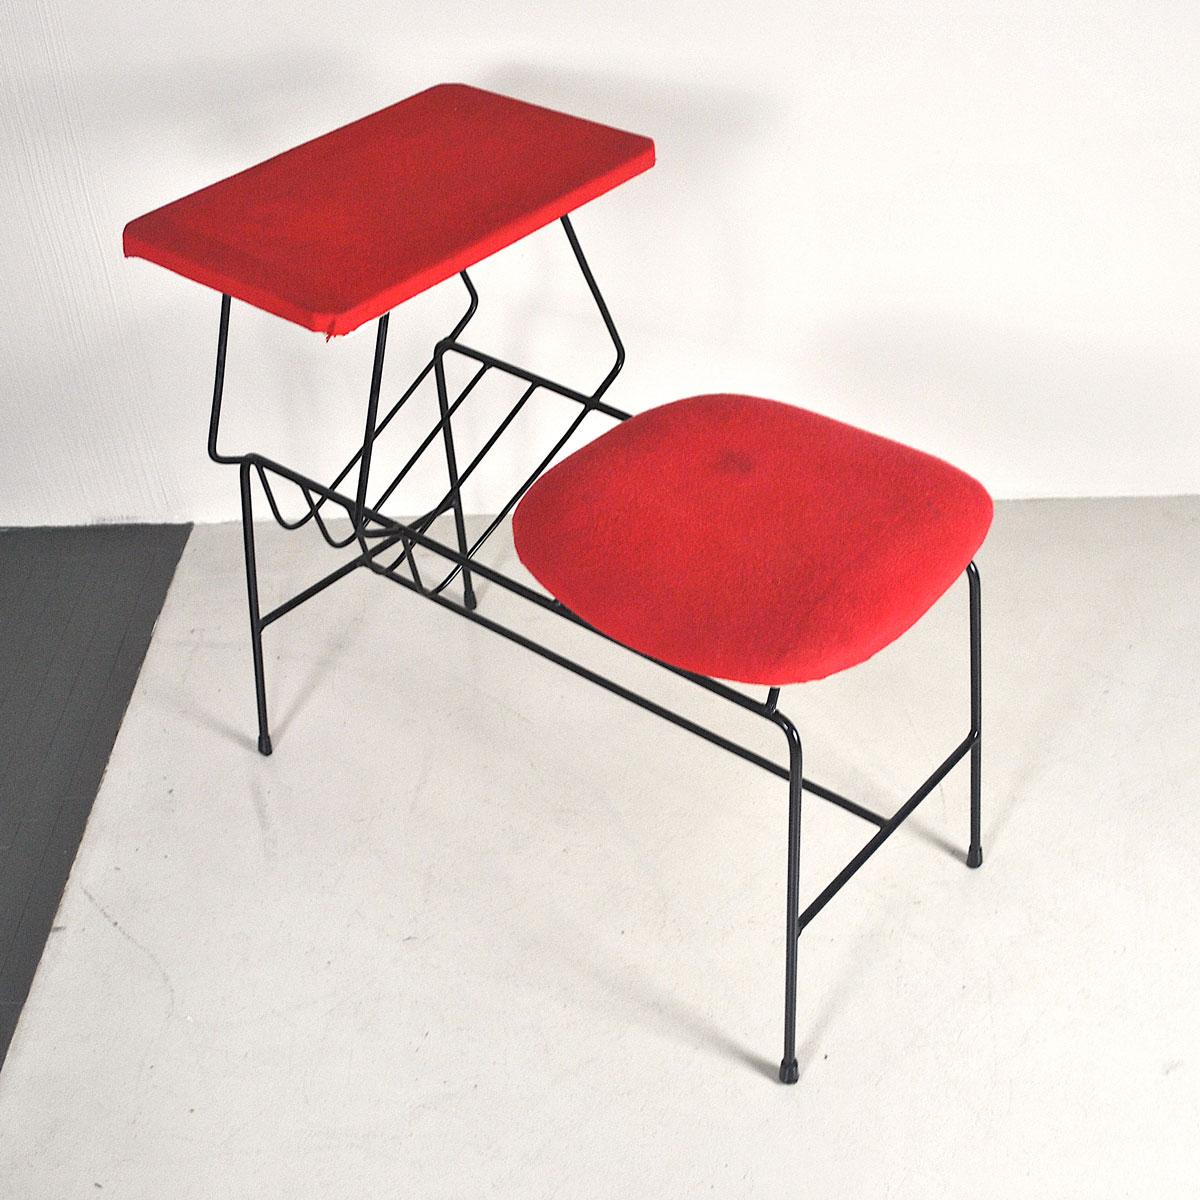 Mid-20th Century Italian 1960s Desk Bench with Seat and Small Top in a Red Fabric For Sale